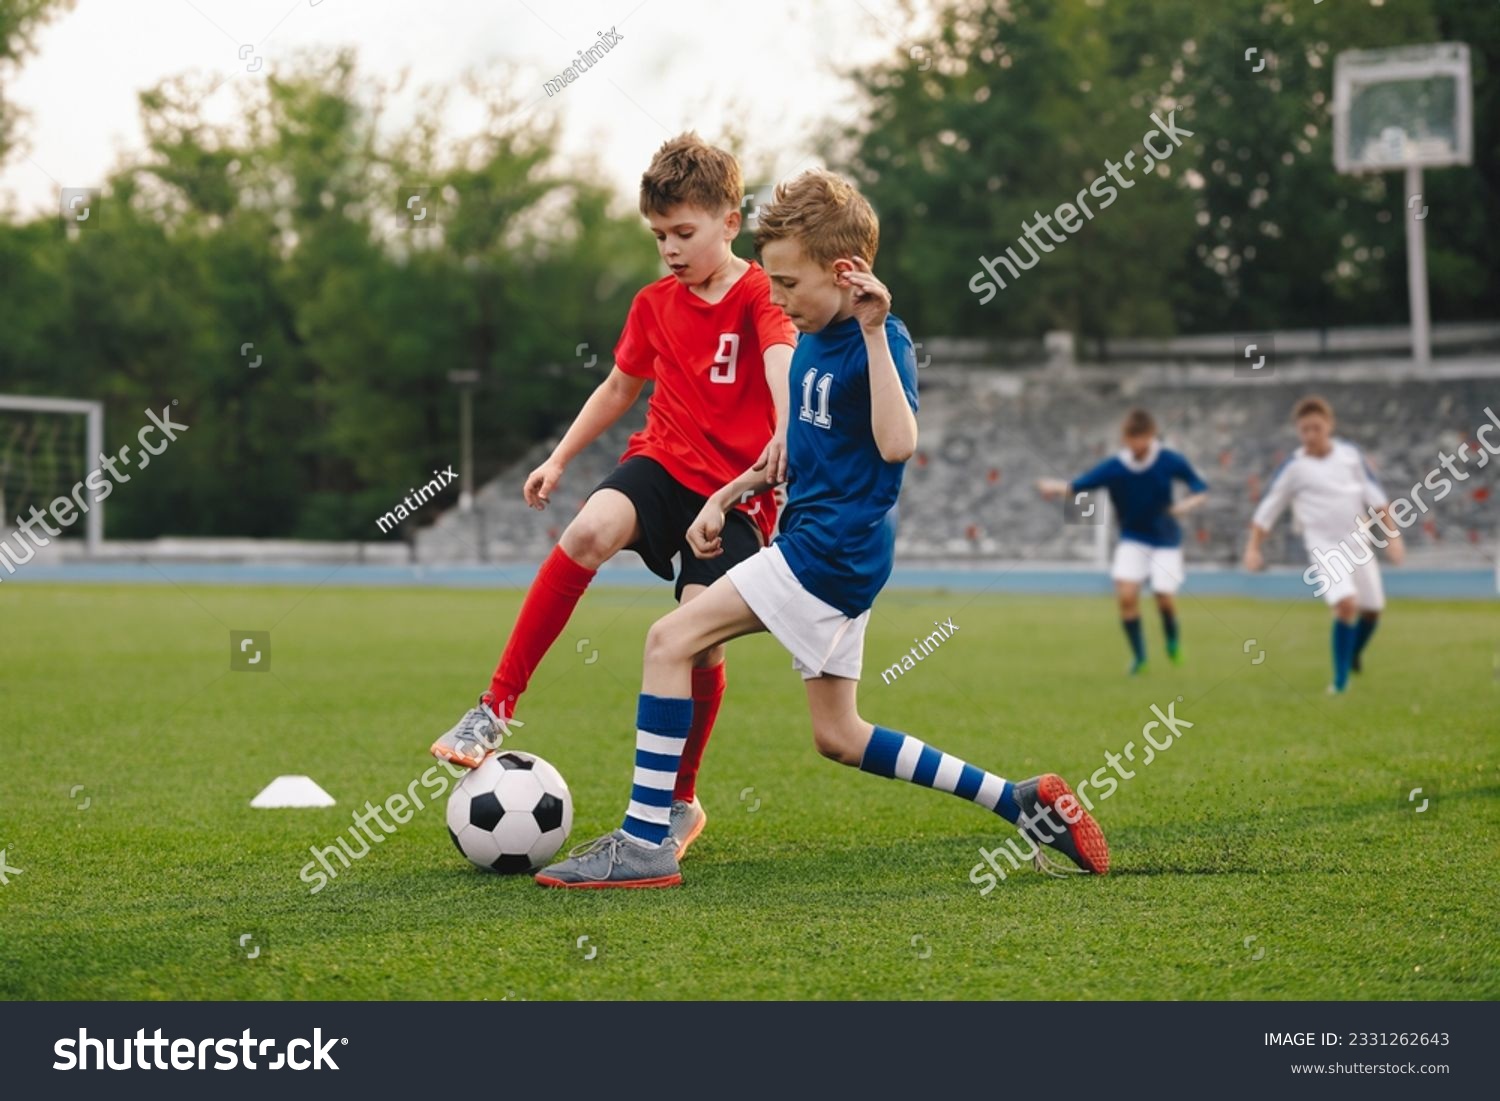 Boys playing football game on a school tournament. Football soccer match for children. Dynamic, action picture of kids competition during playing football #2331262643